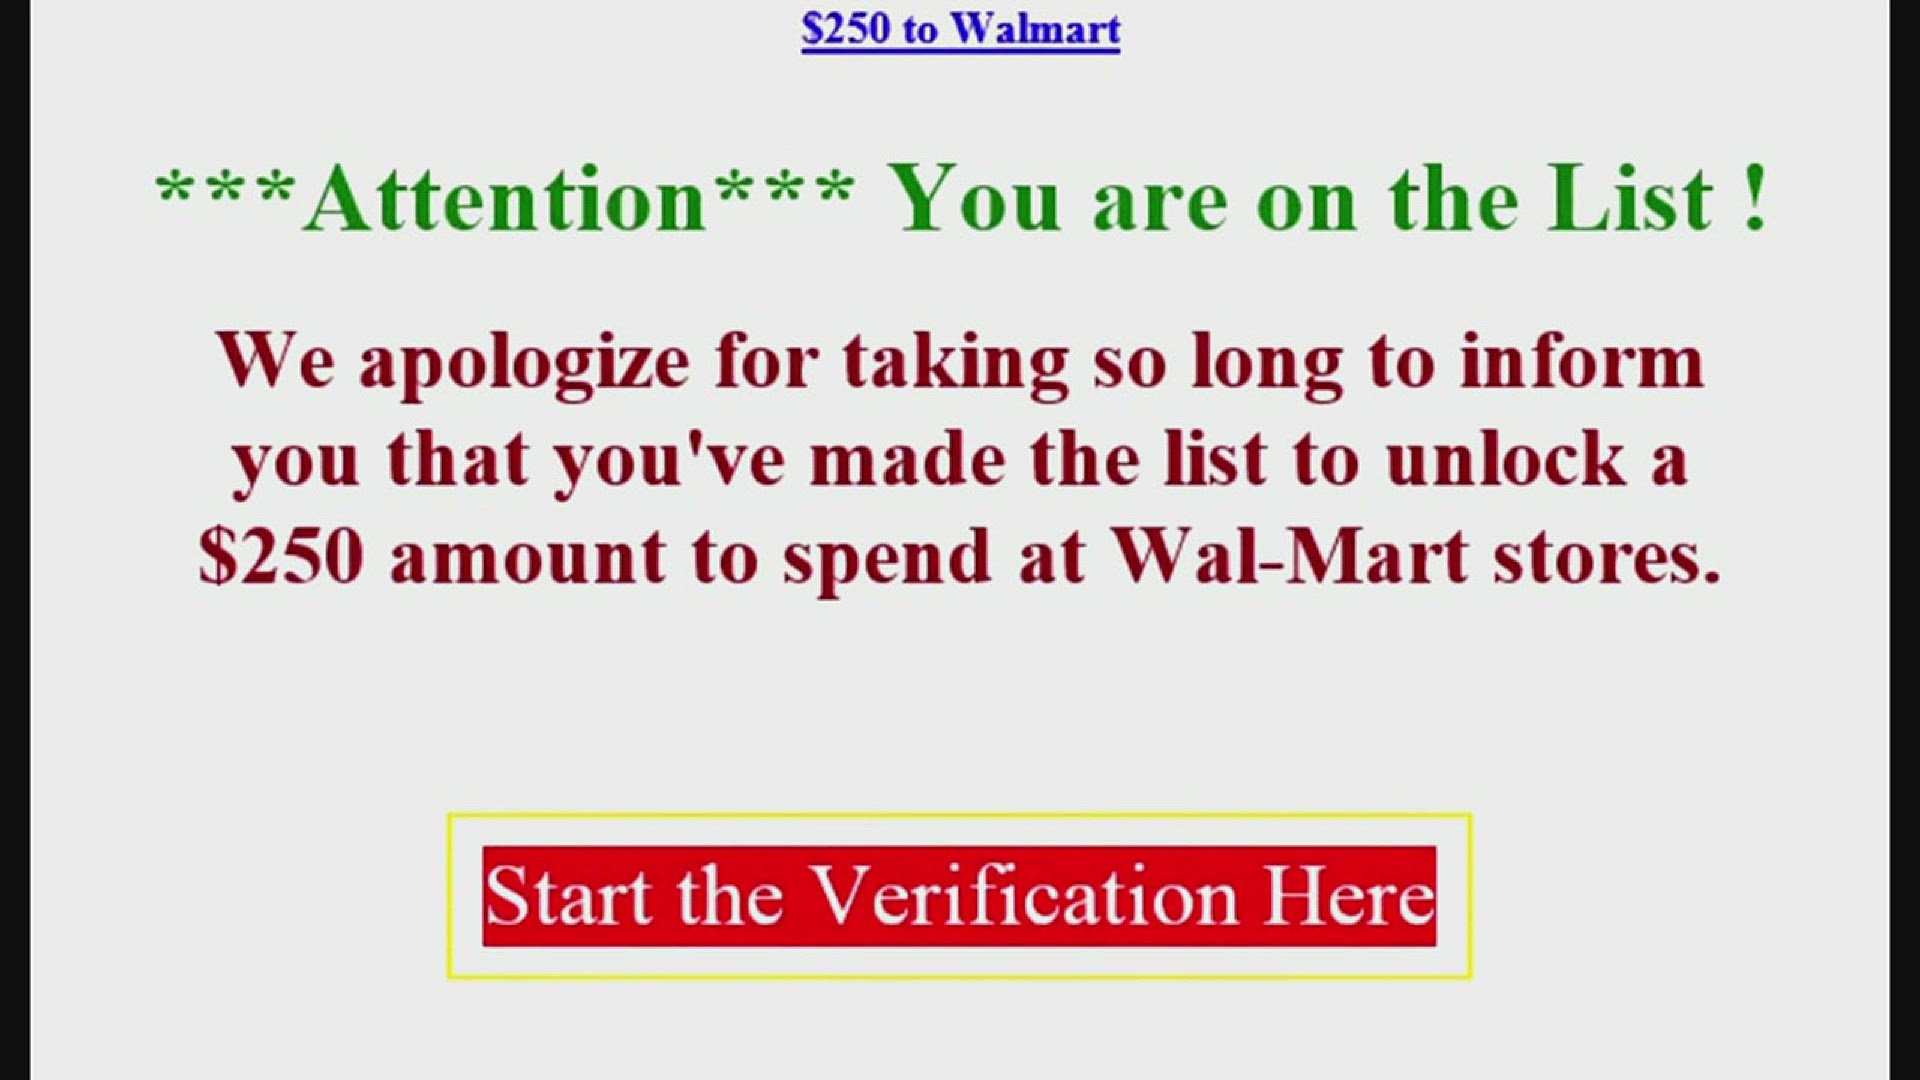 Don't Let Your Walmart Gift Card Go to Waste: Learn How to Check Your